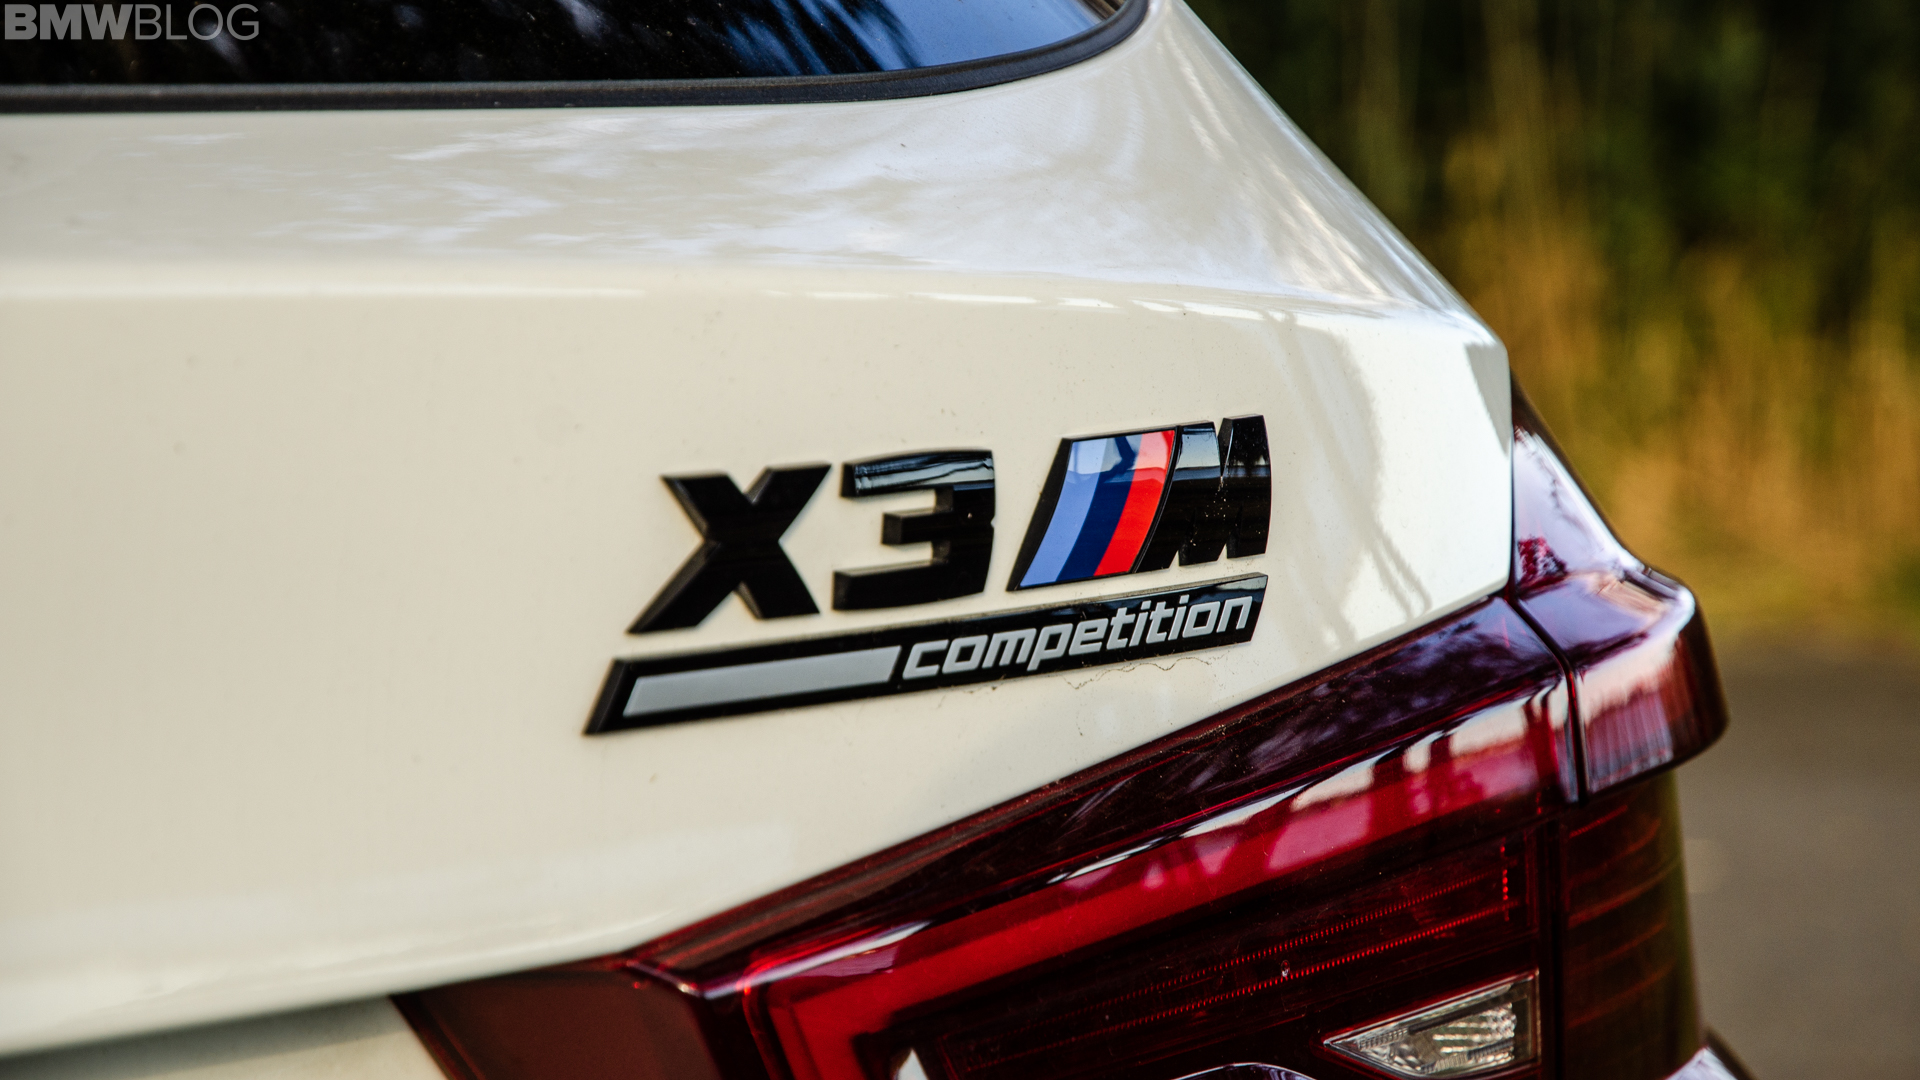 BMW X3 M Competition 13 of 35